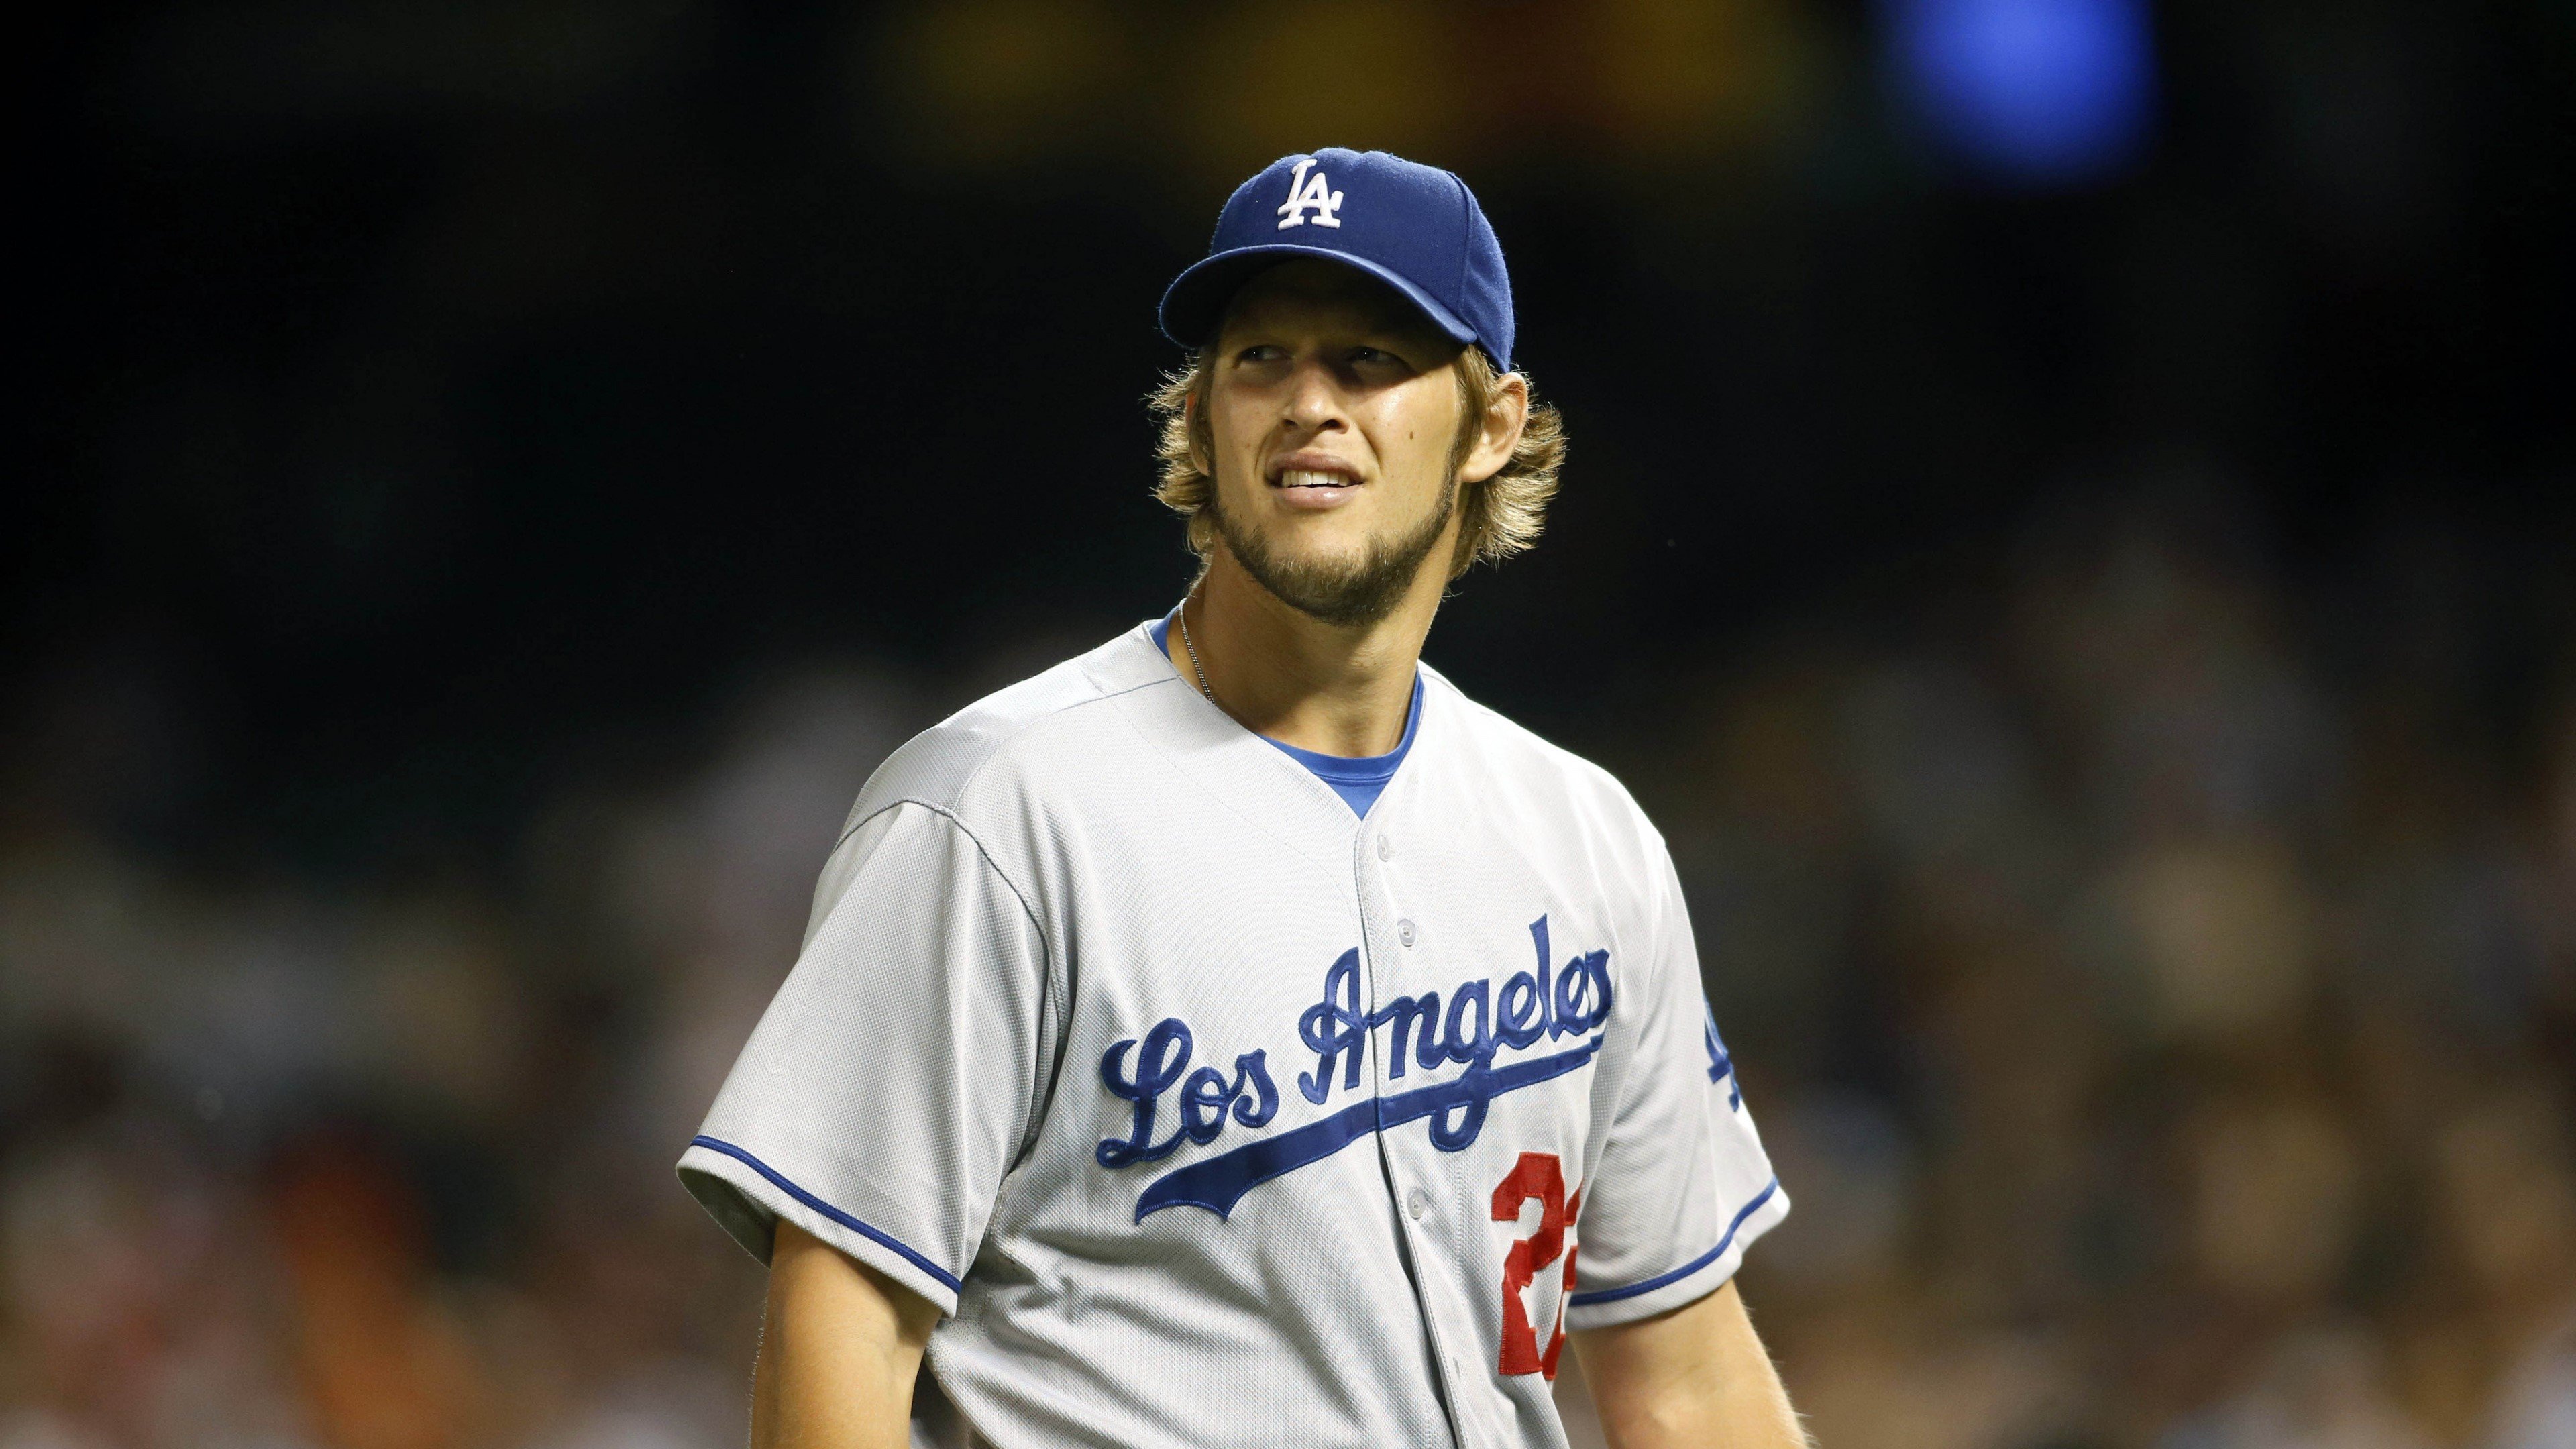 Wallpaper Pitcher Clayton Kershaw of Los angeles dodgers